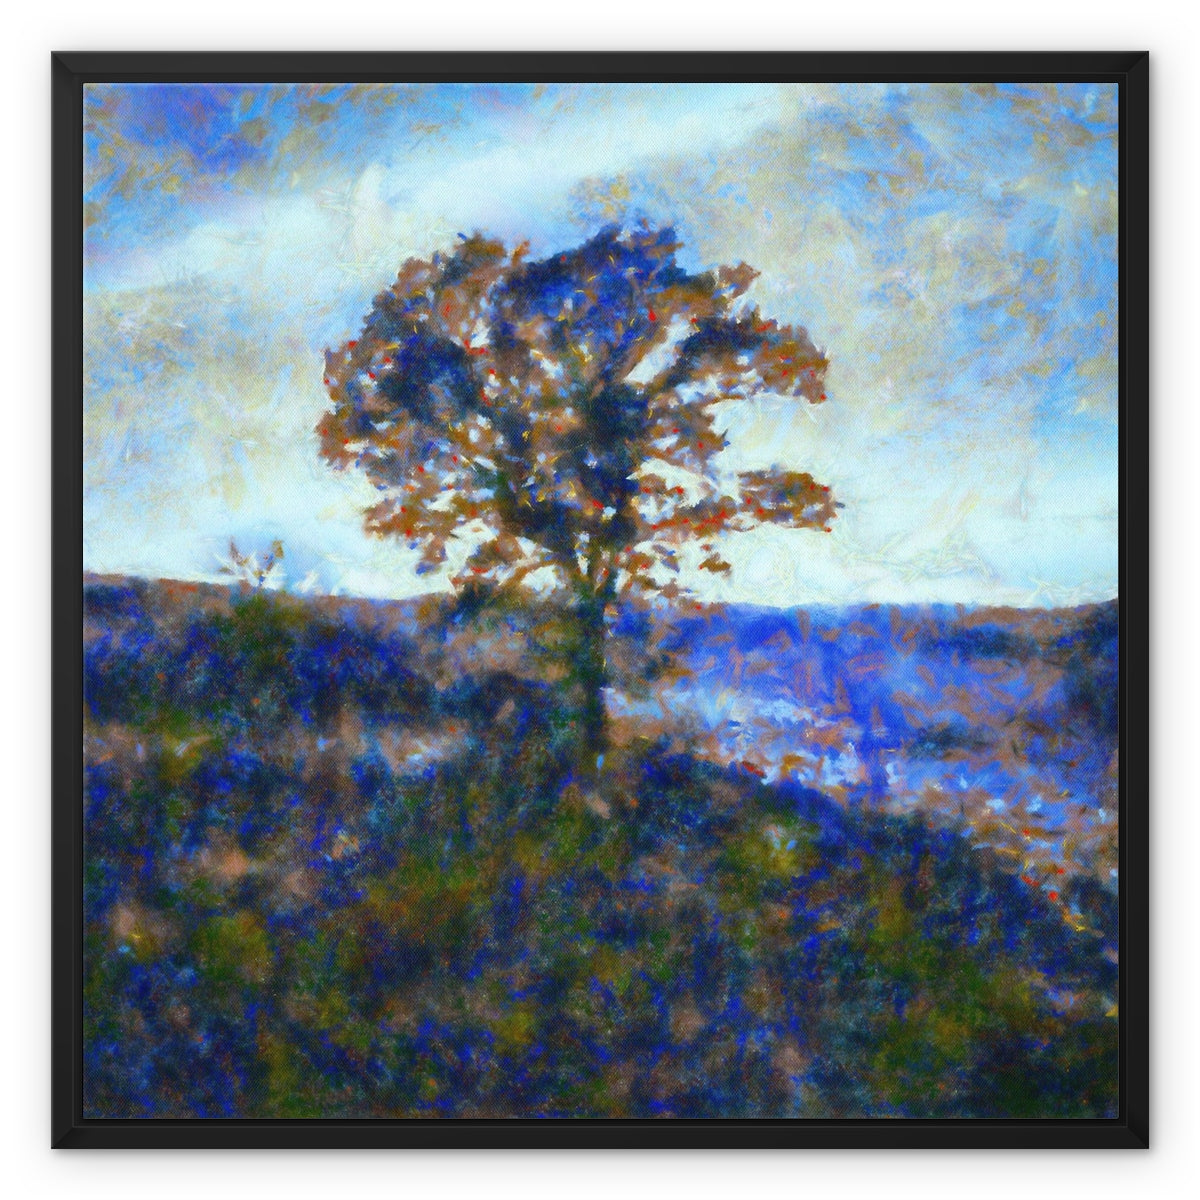 A Winter Highland Tree Painting | Framed Canvas From Scotland-Floating Framed Canvas Prints-Scottish Highlands & Lowlands Art Gallery-24"x24"-Paintings, Prints, Homeware, Art Gifts From Scotland By Scottish Artist Kevin Hunter